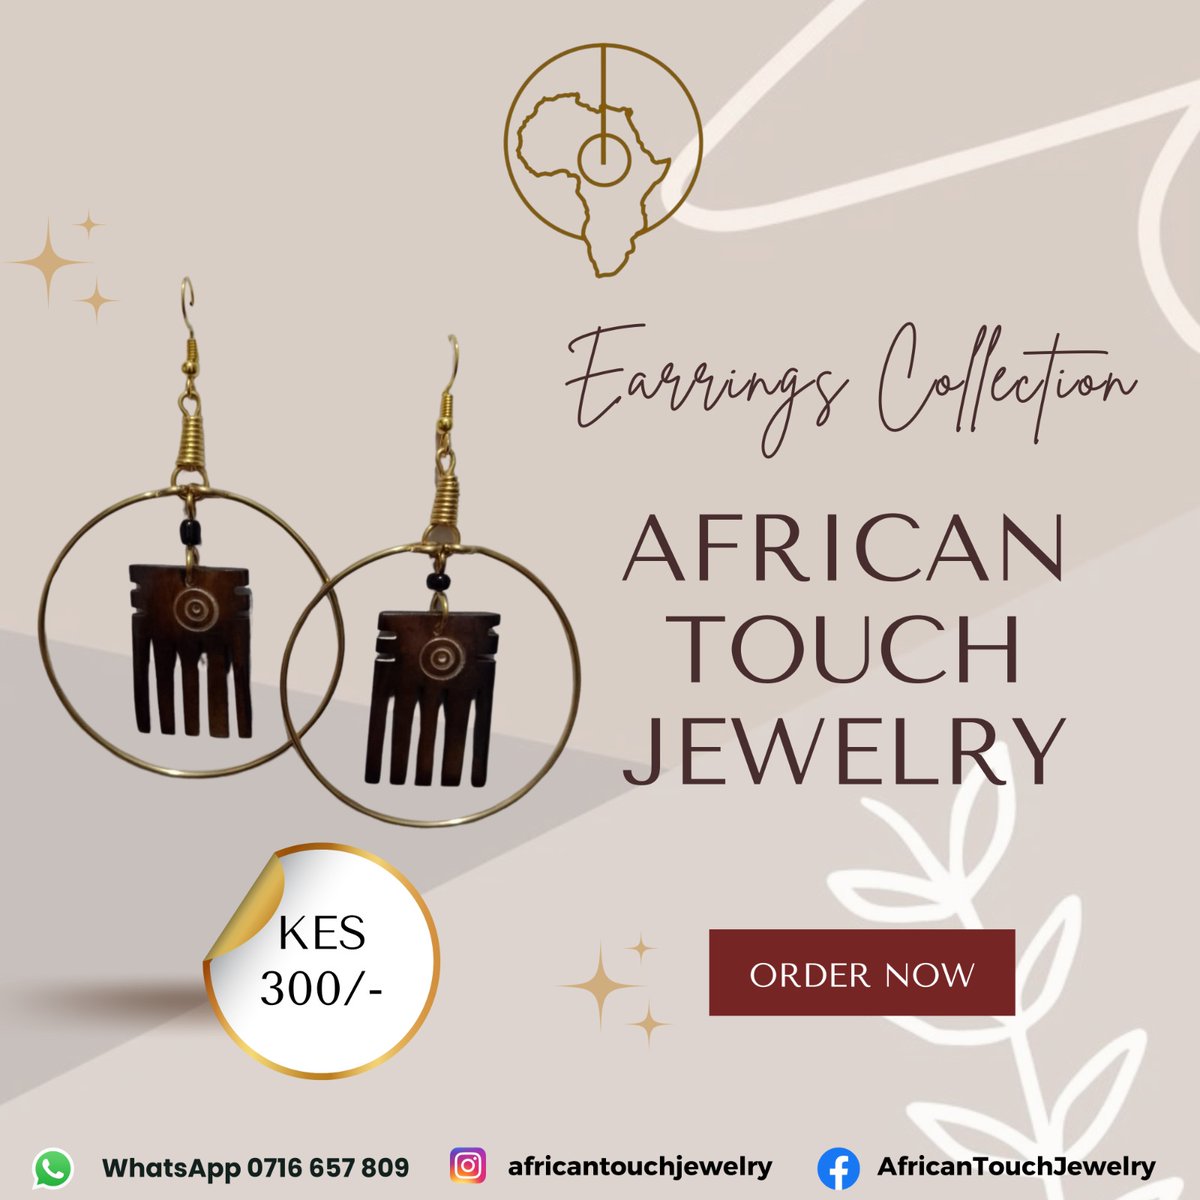 Our earrings are hand-made with the African Heritage Artistry that resonates with our rich culture. ✨Purchase your pair today at only 300/-

To Order:
📞0716657809

#africantouchjewelry #africantouchjewellery #africanjewelry #africanjewellery #handmadejewelry #handmadejewelry